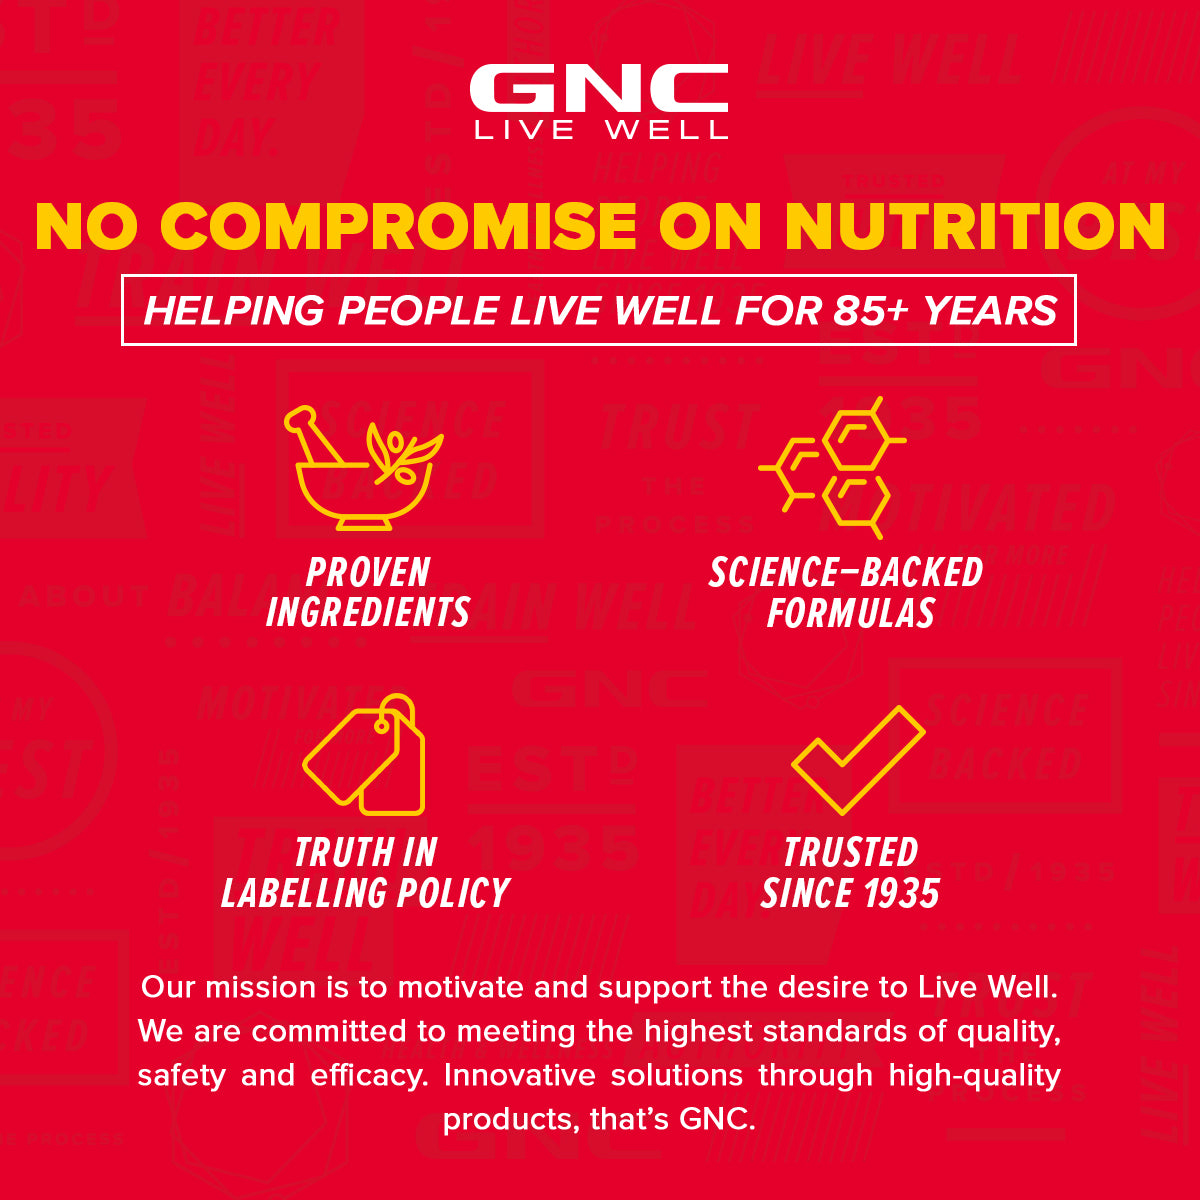 GNC Mega Men Sport Multivitamin - Supports Muscle Performance & Recovery | Made For Fitness Lifestyle